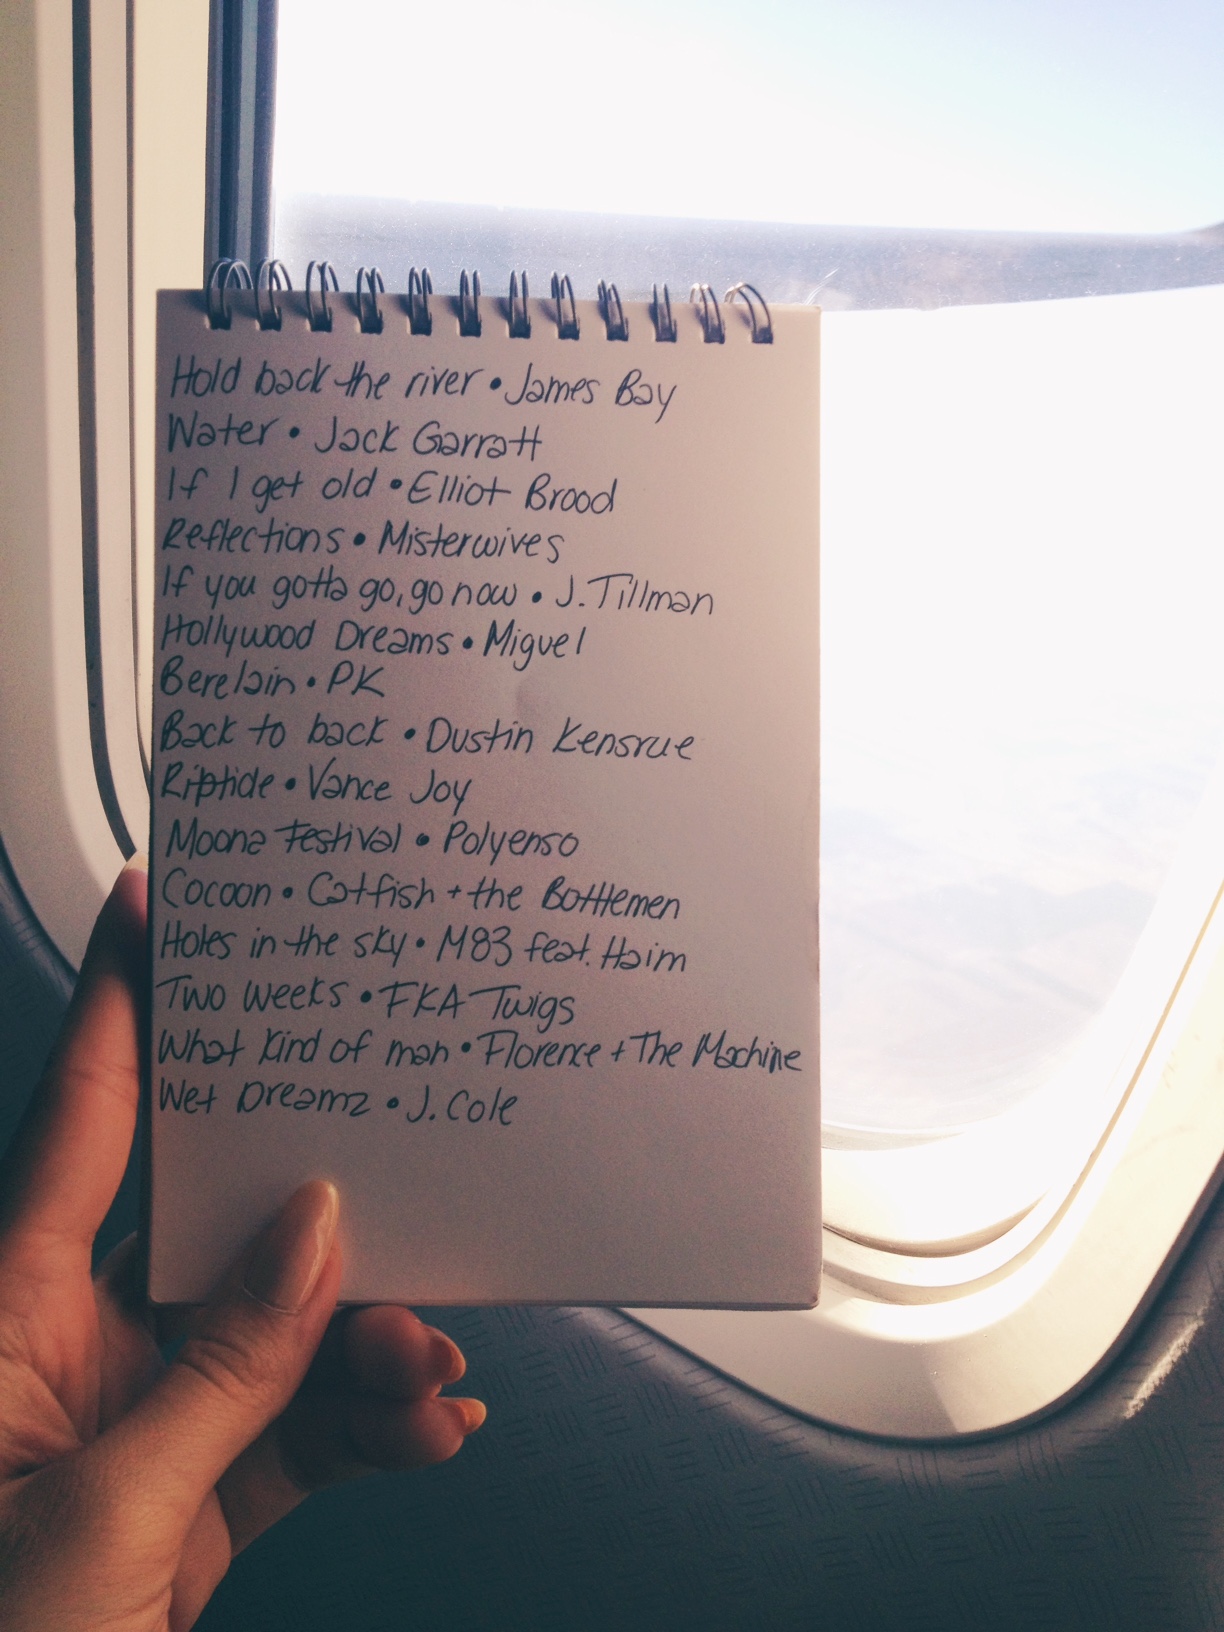 Music Monday March 30th- Airport playlist